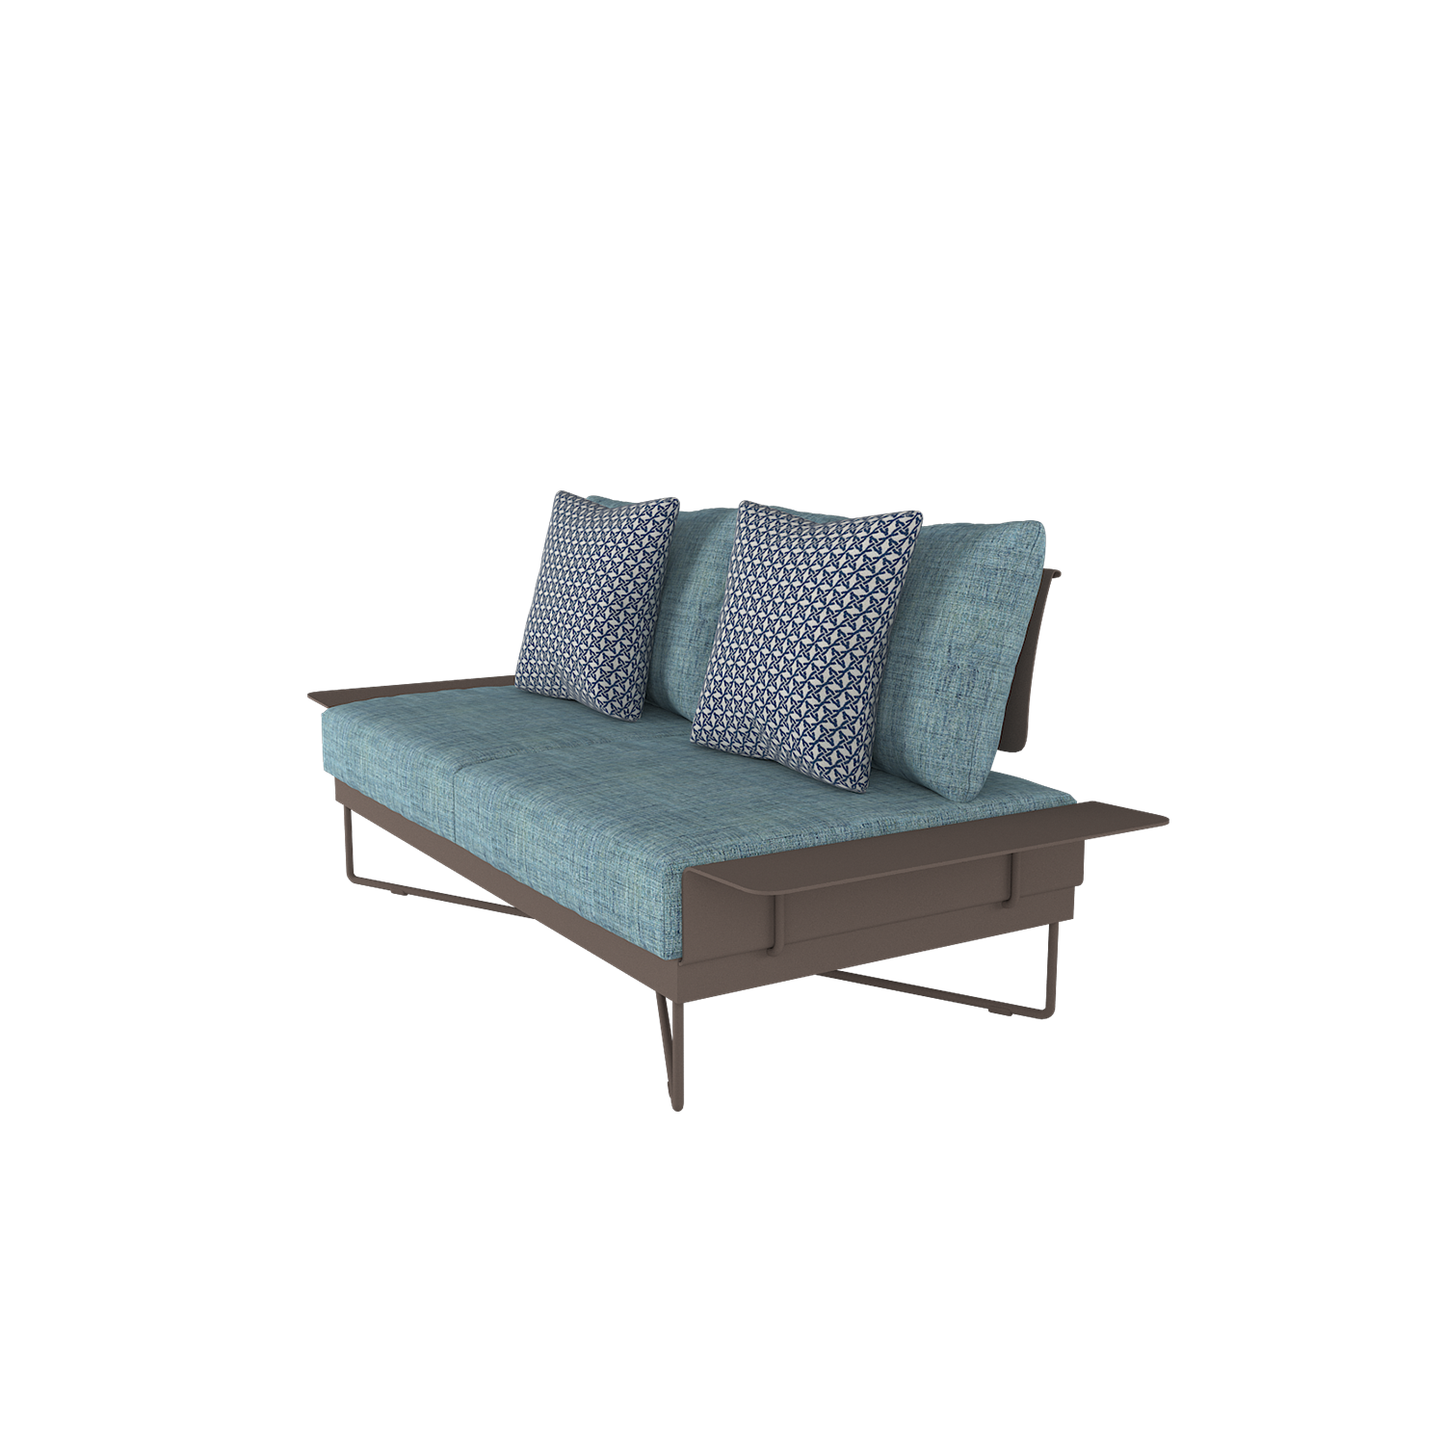 Coral Reef Outdoor Loveseat with Aluminum Back and Armrests | Roberti | Outdoor Lounge chairs | coral-reef-outdoor-loveseat-2-with-armrests